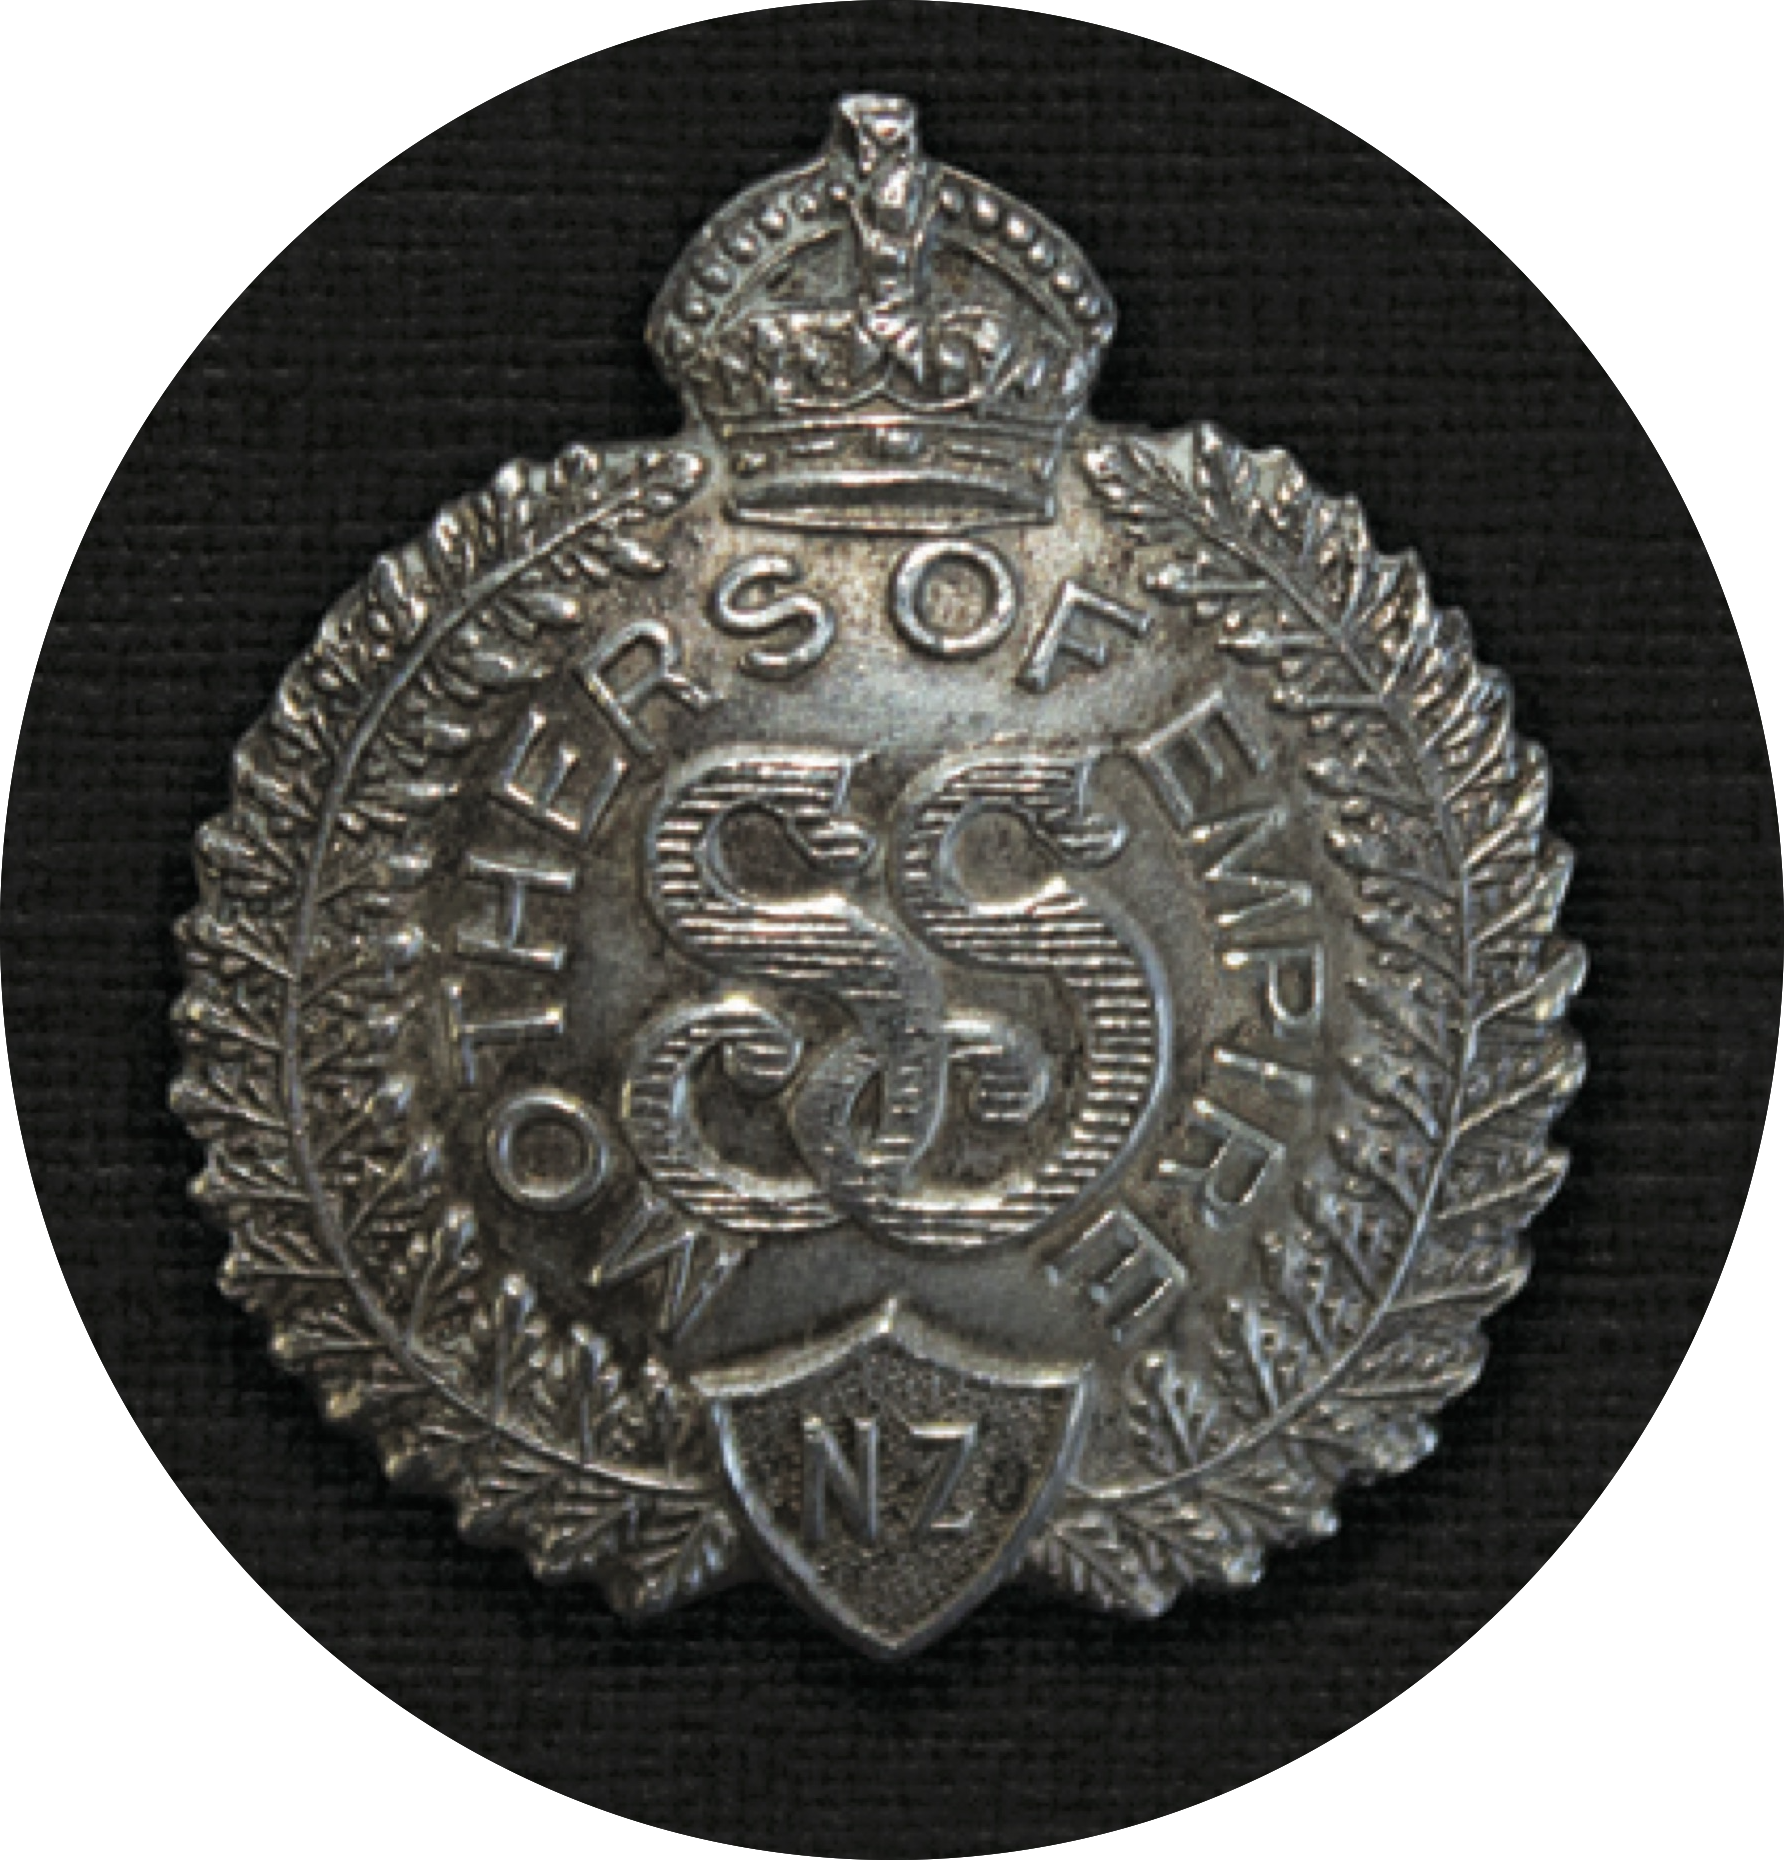 A Mothers of Empire Badge